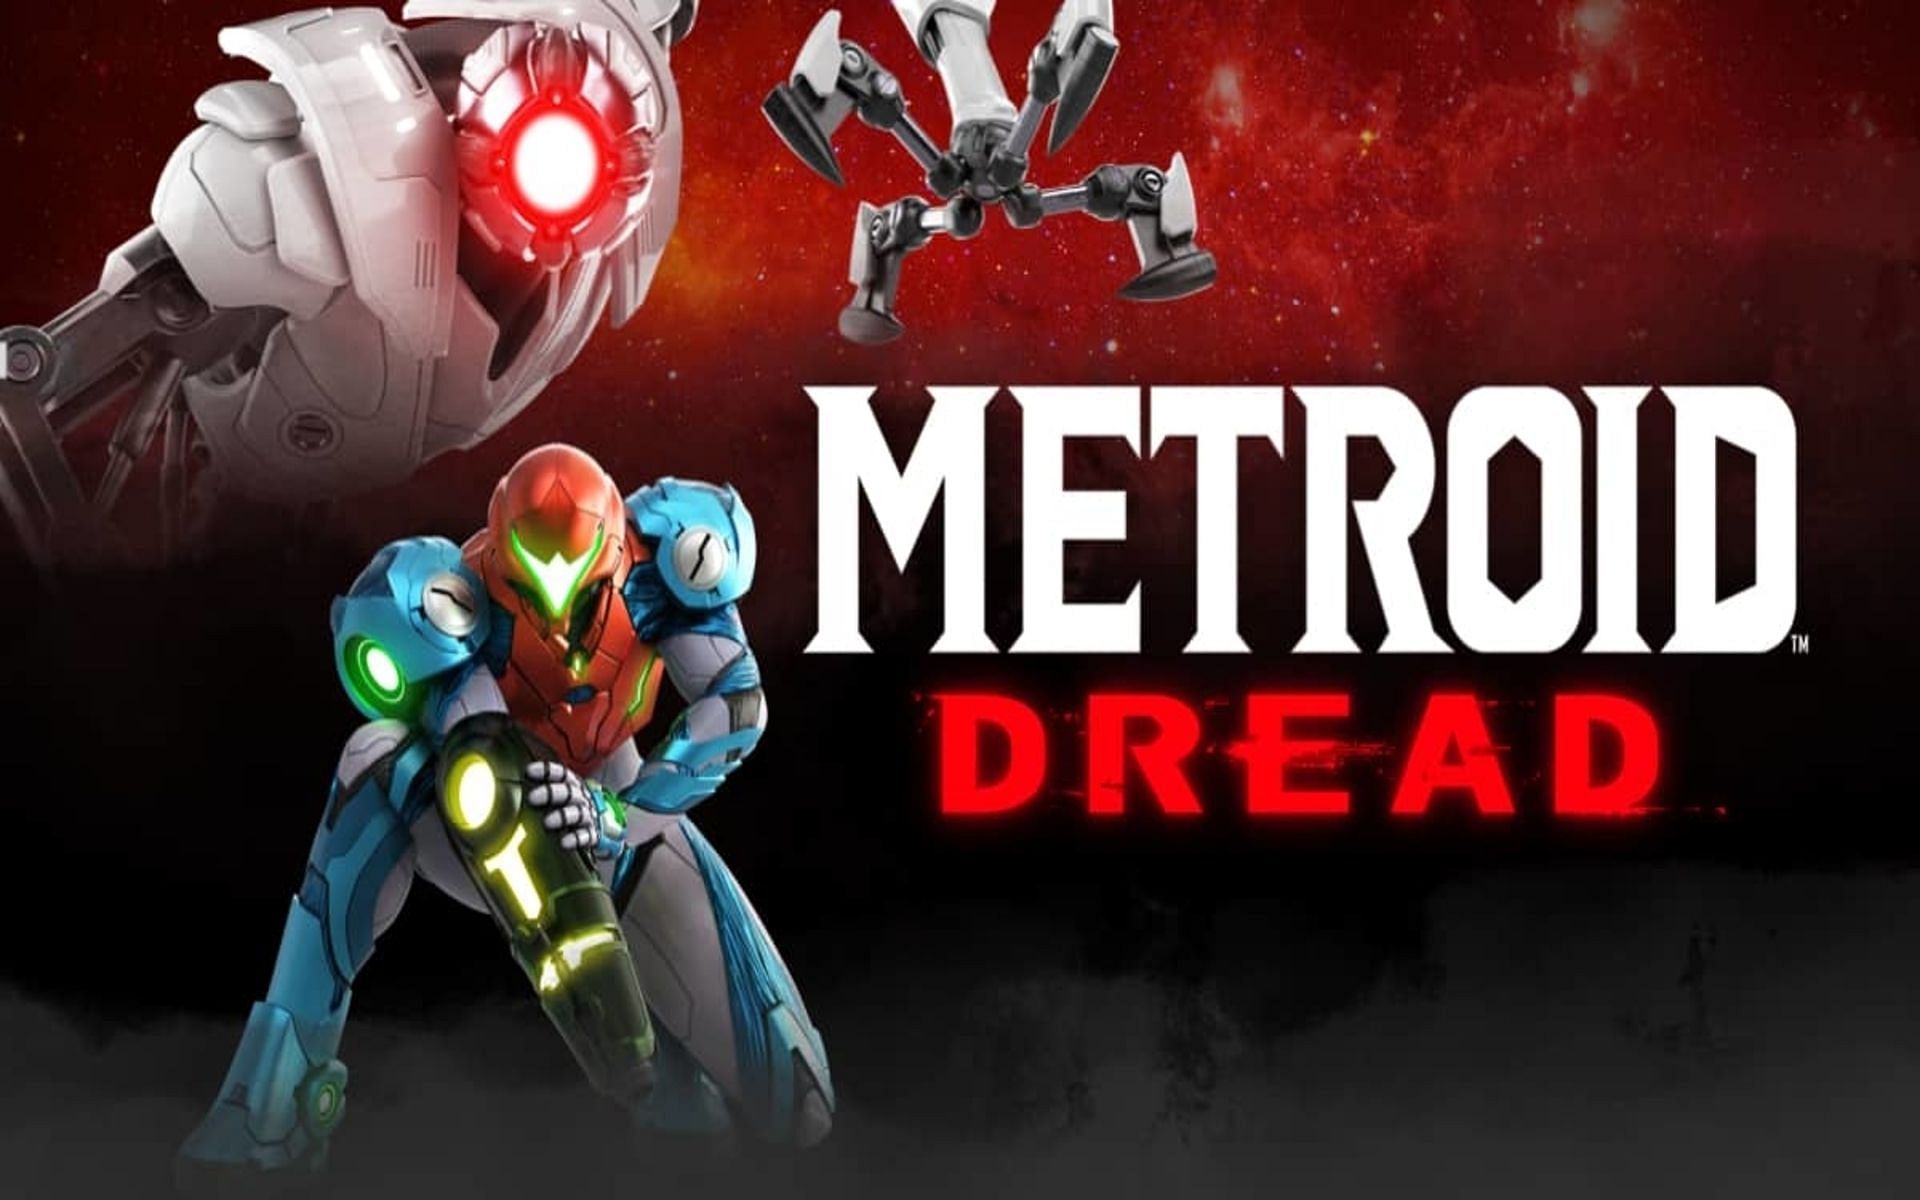 Artwork from several other games appear after beating Metroid dread (Image via MercurySteam)